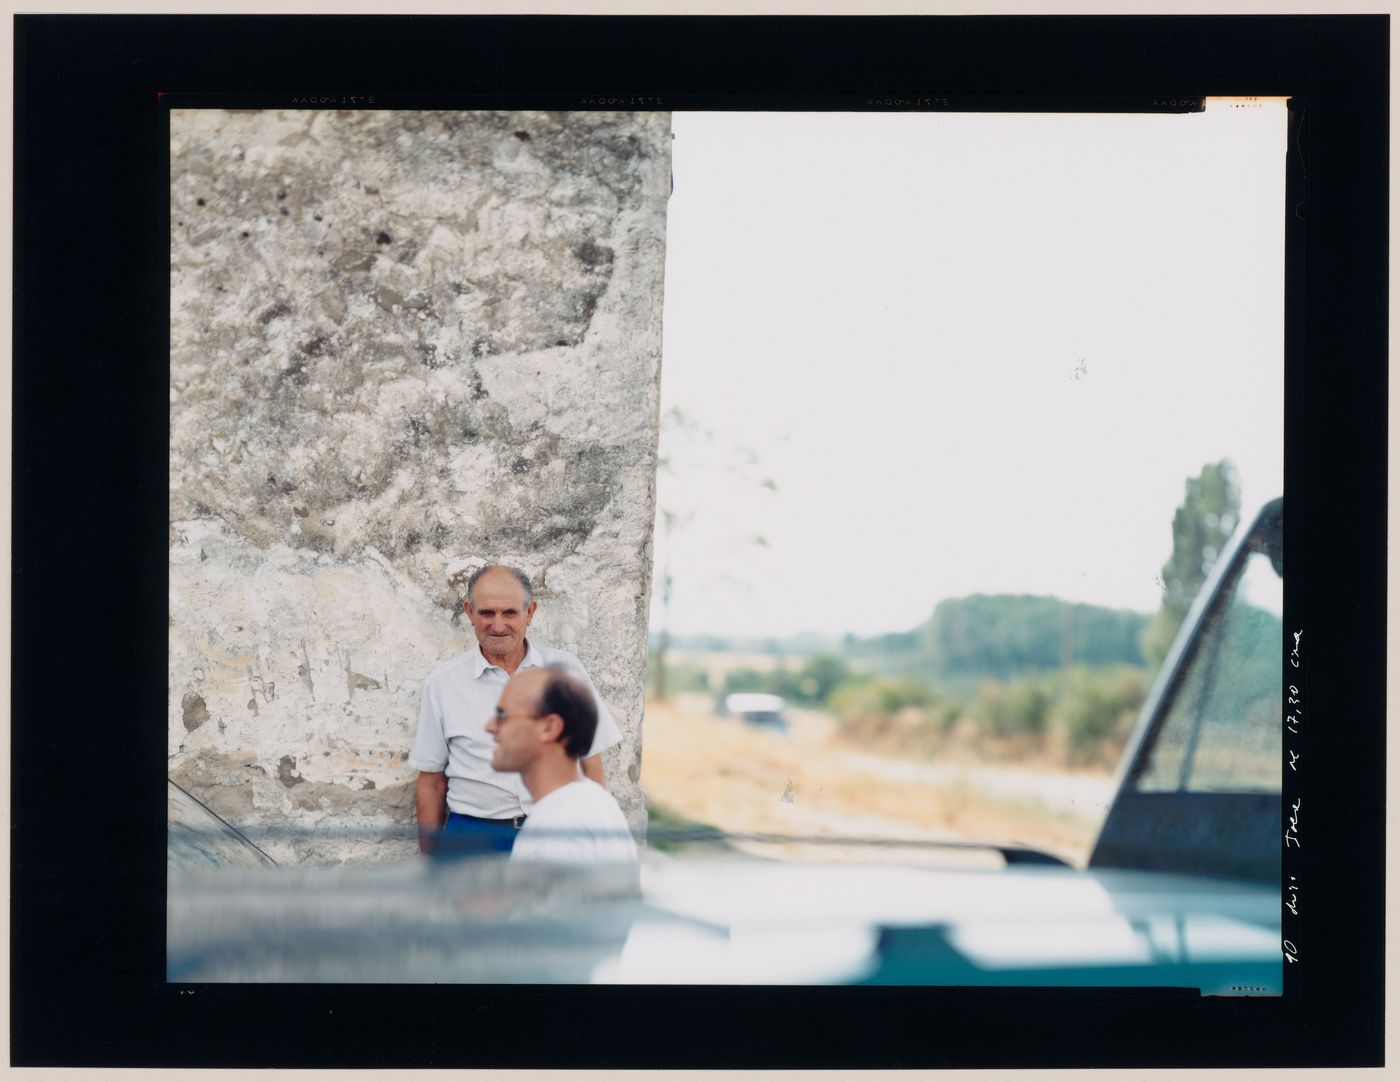 Group portrait of two men in front of a stone wall, Ponferrada, Spain (from the series "In between cities")